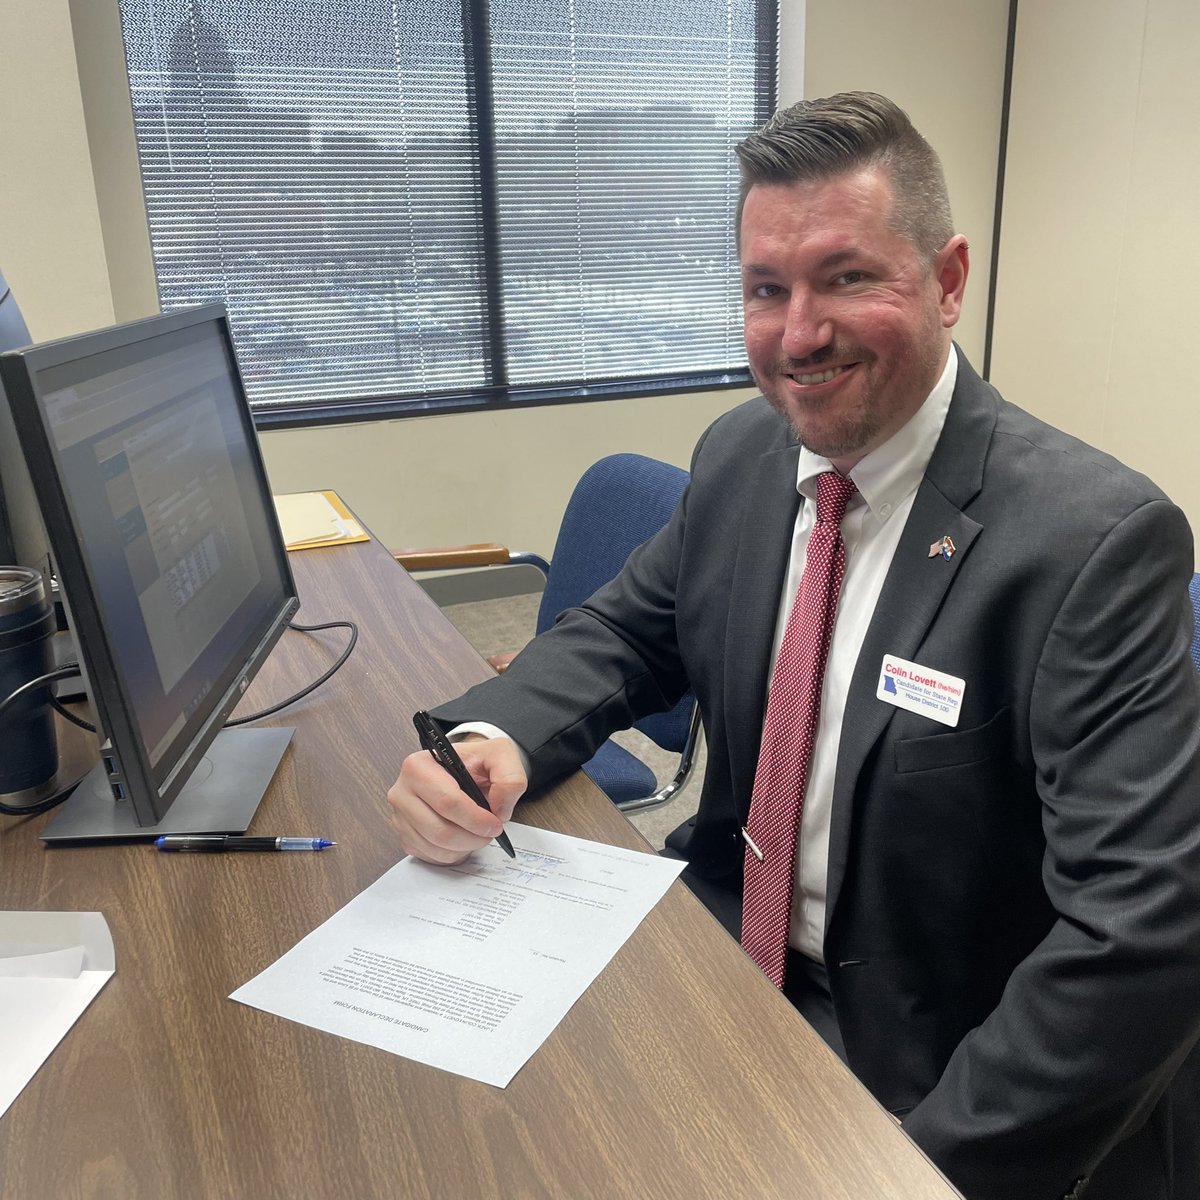 🧵Energized to be in Jefferson City today to officially file to run for State Representative of District 100 in West St. Louis County (Ballwin). I am ready to serve our community as a voice of reason and will protect the rights and dignity of ALL people in Missouri.